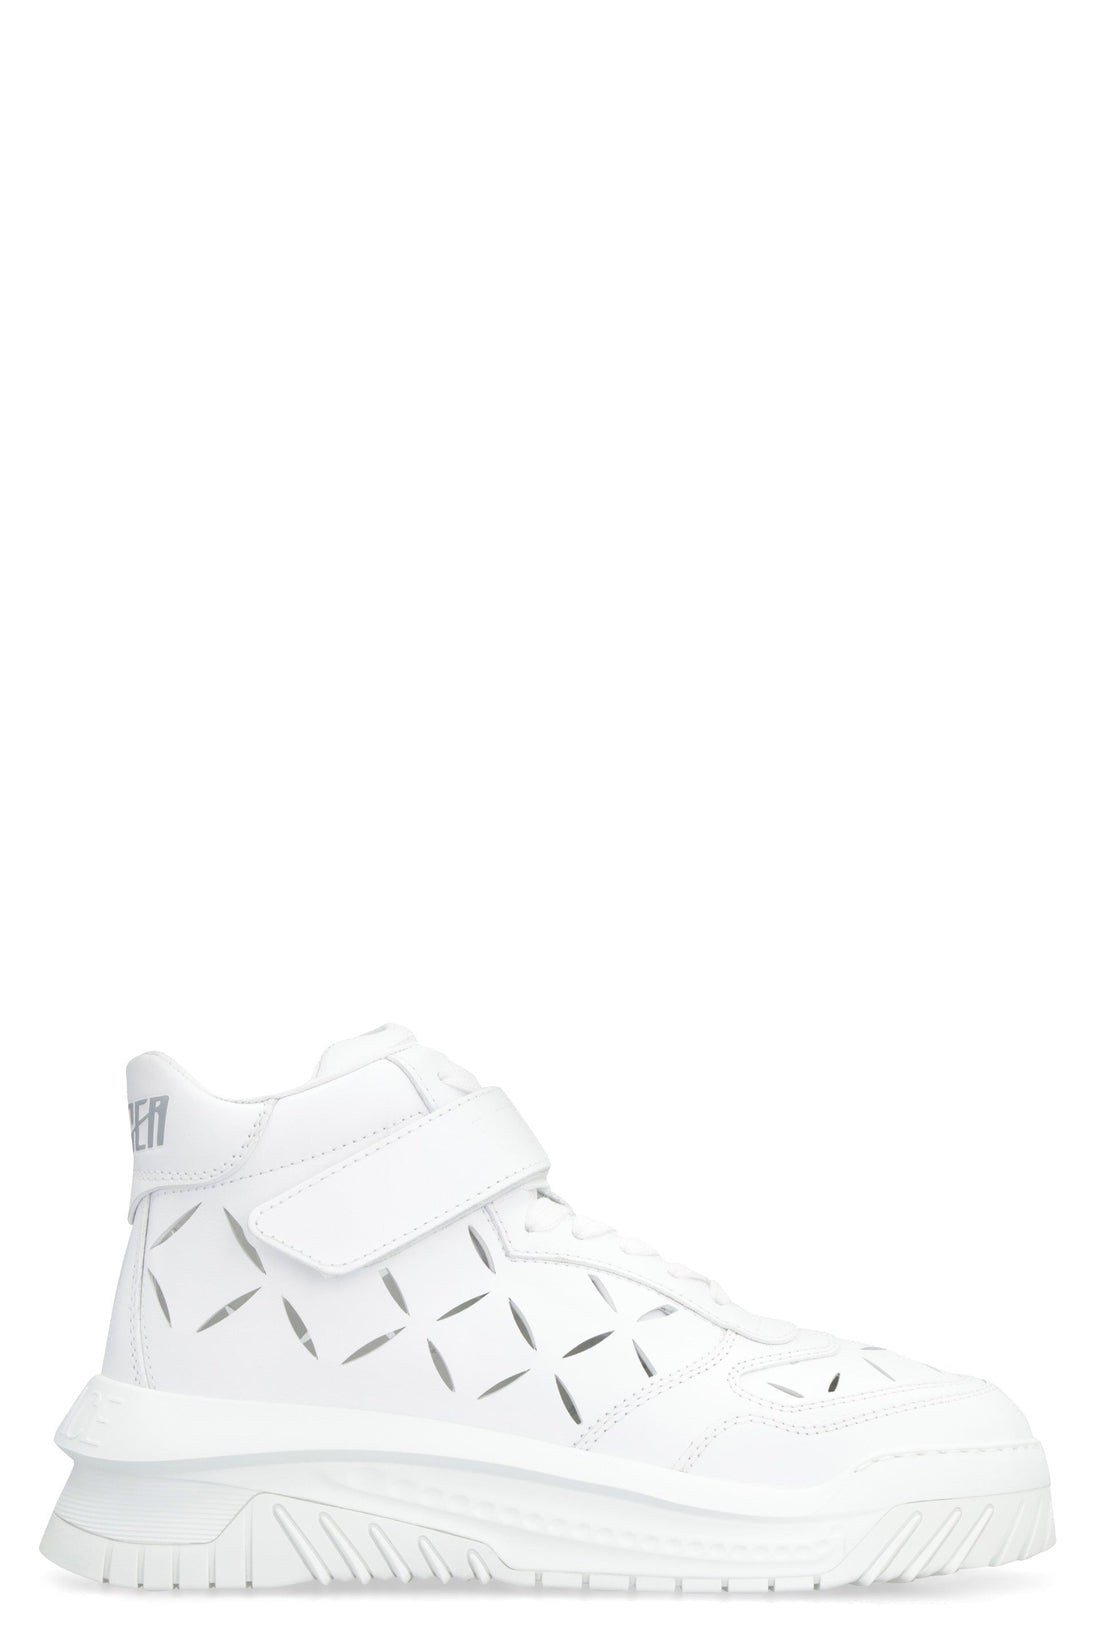 Versace-OUTLET-SALE-Odissea leather high-top sneakers-ARCHIVIST